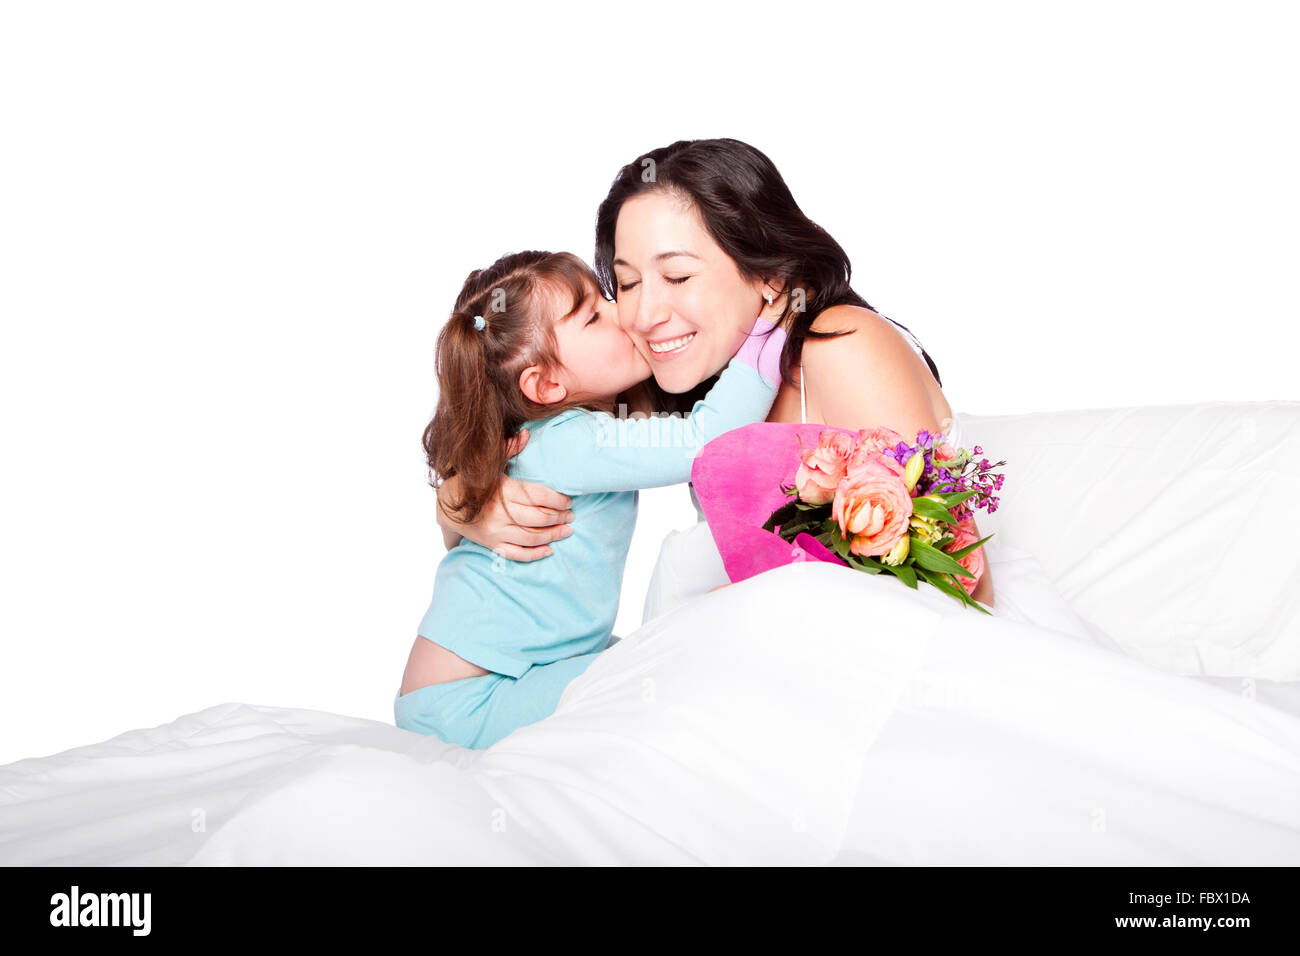 Child gives flowers and kiss to mom in bed Stock Photo